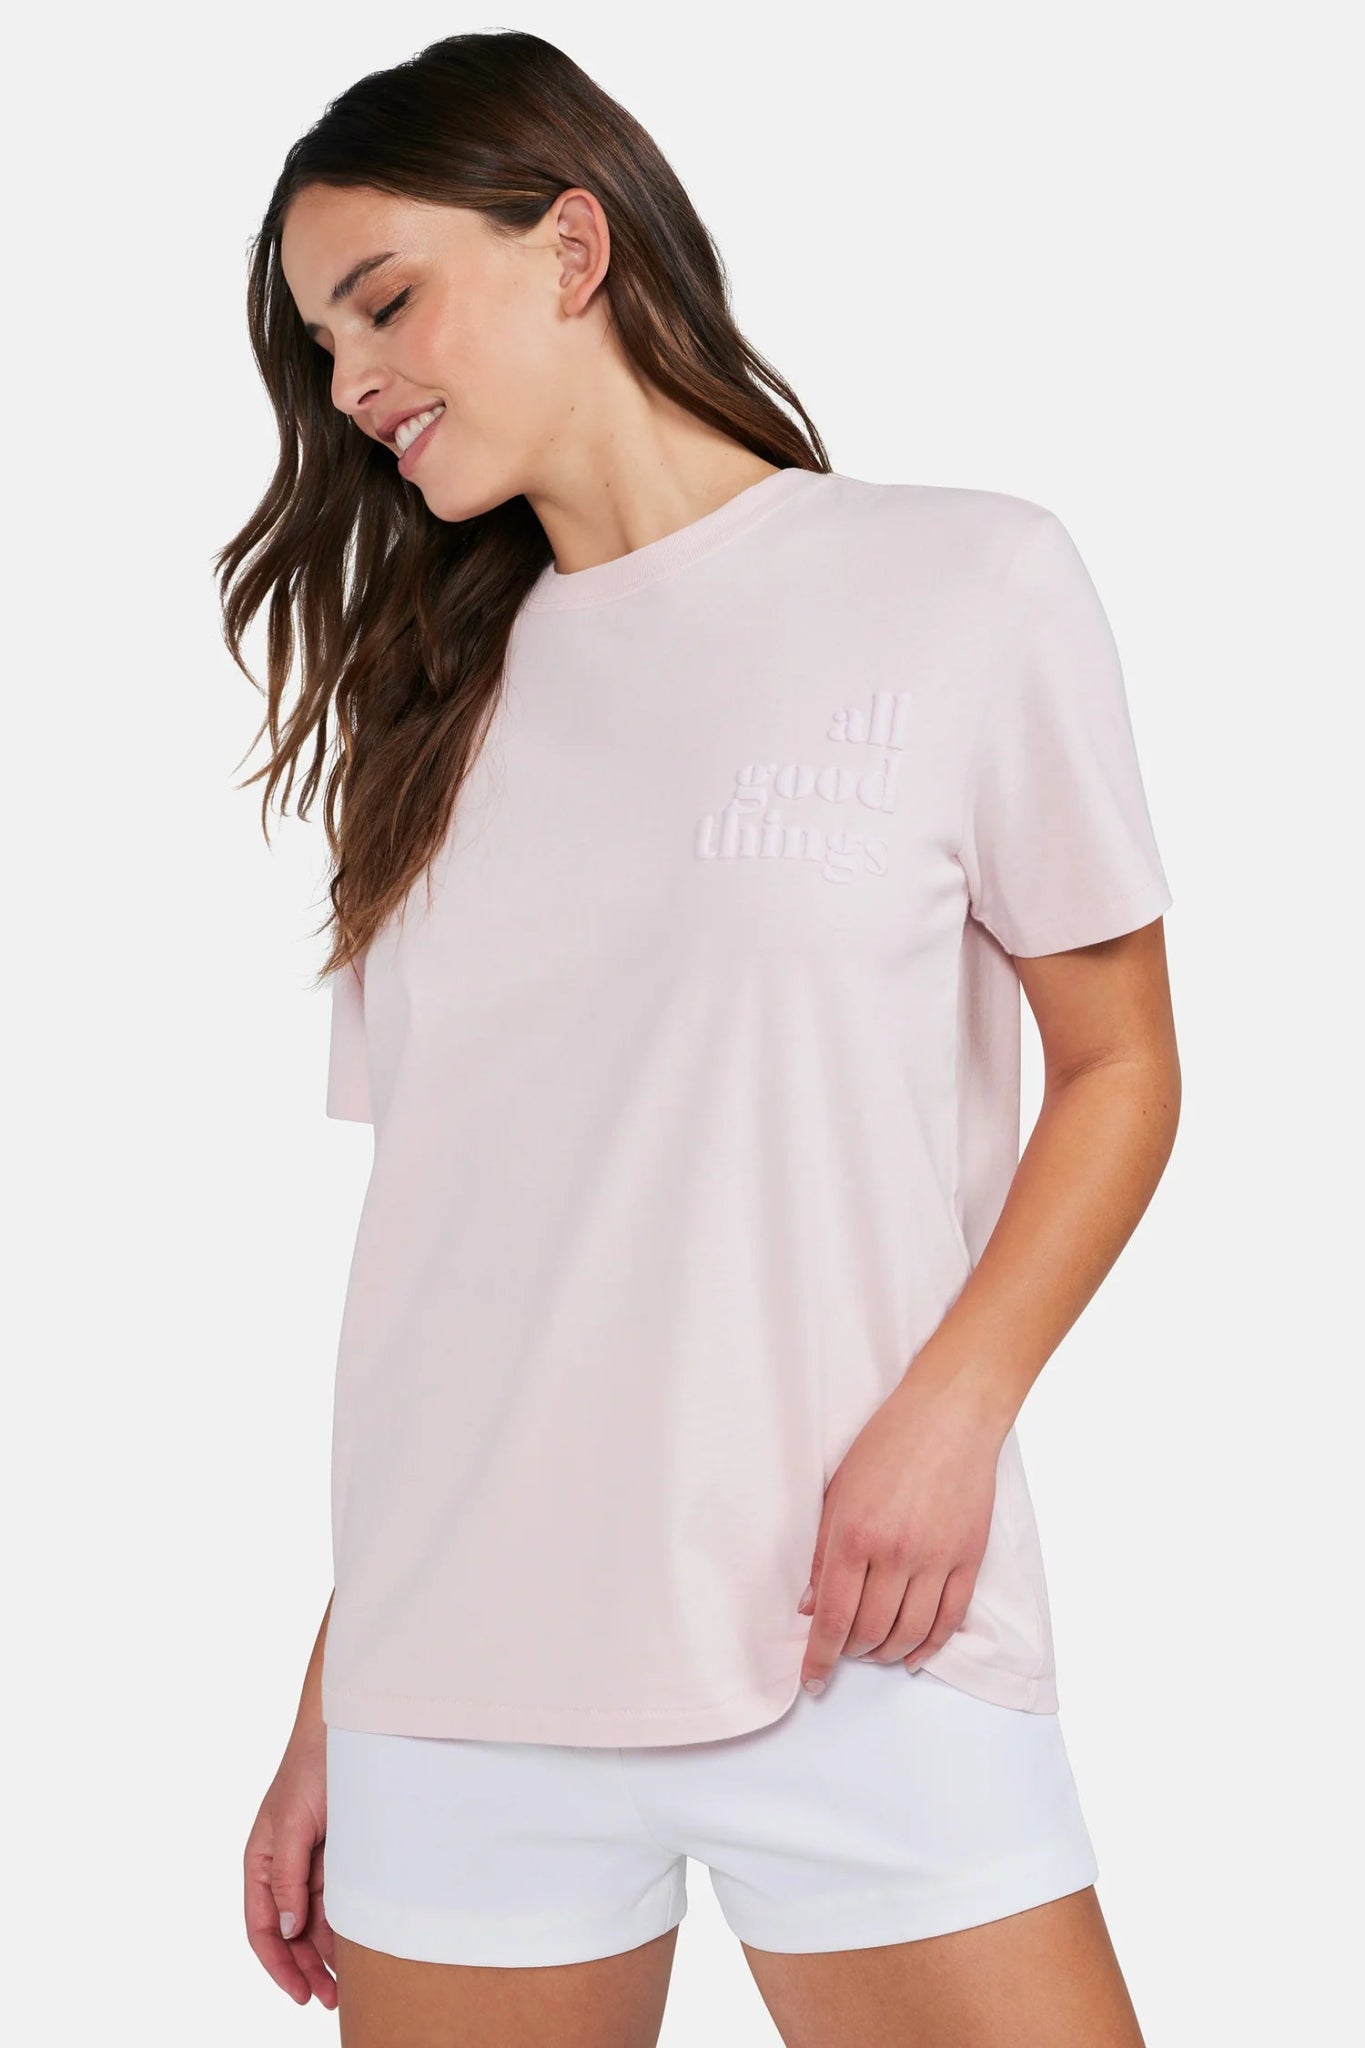 Shop Wildfox All Good Things Ryan Tee - Premium T-Shirt from Wildfox Online now at Spoiled Brat 